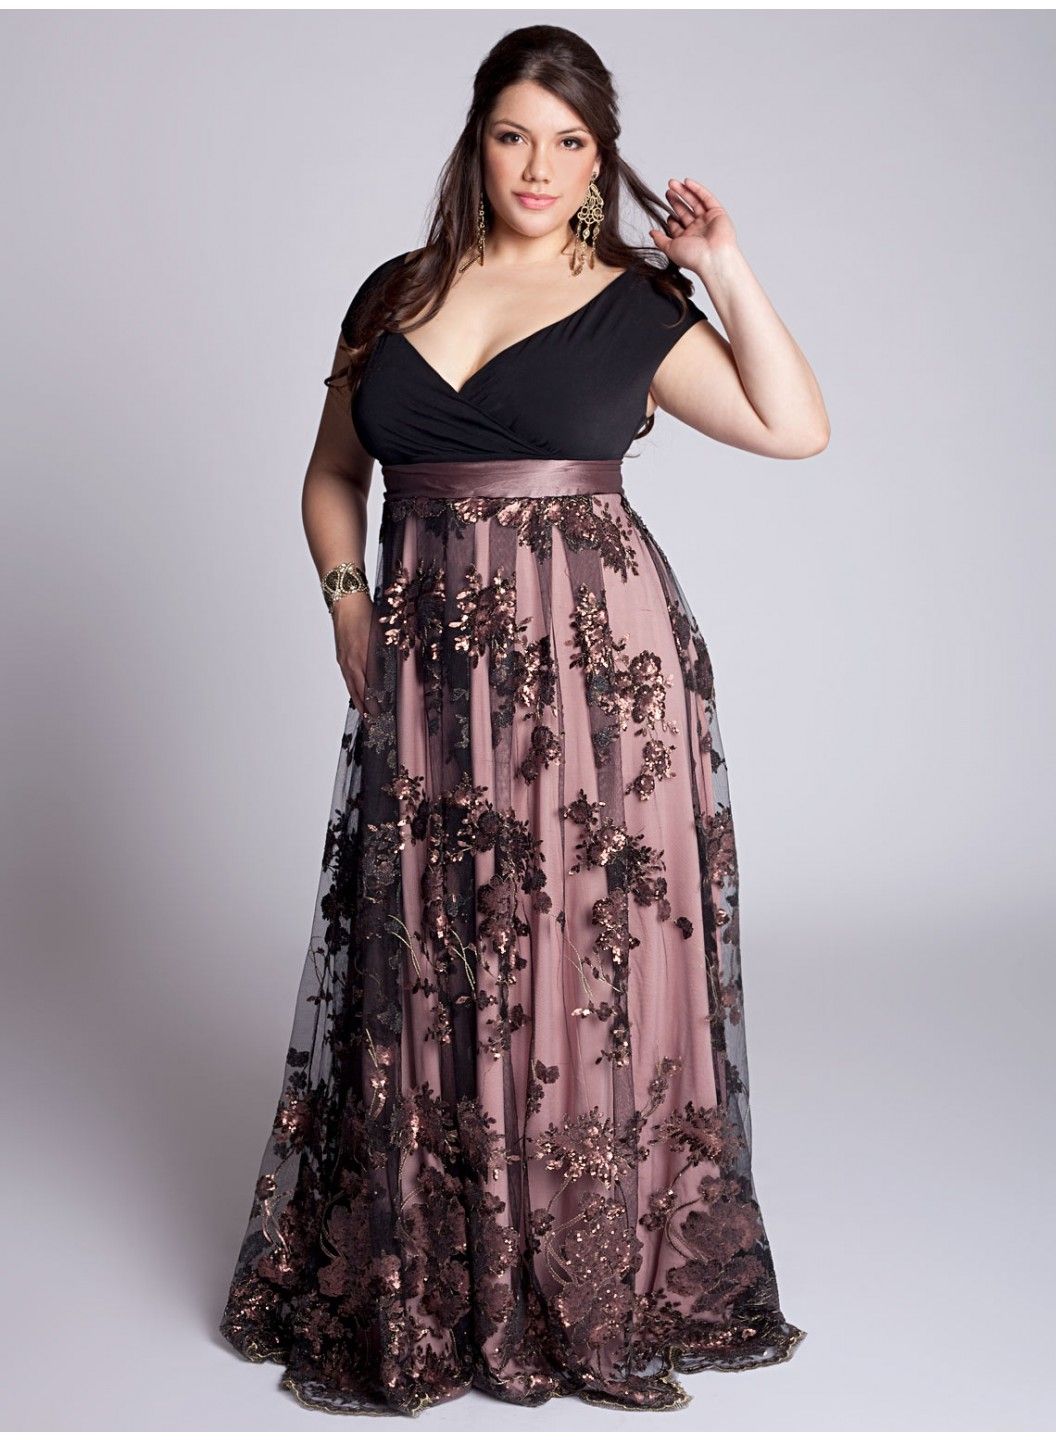 Plus Size Dress Shop In Coimbatore